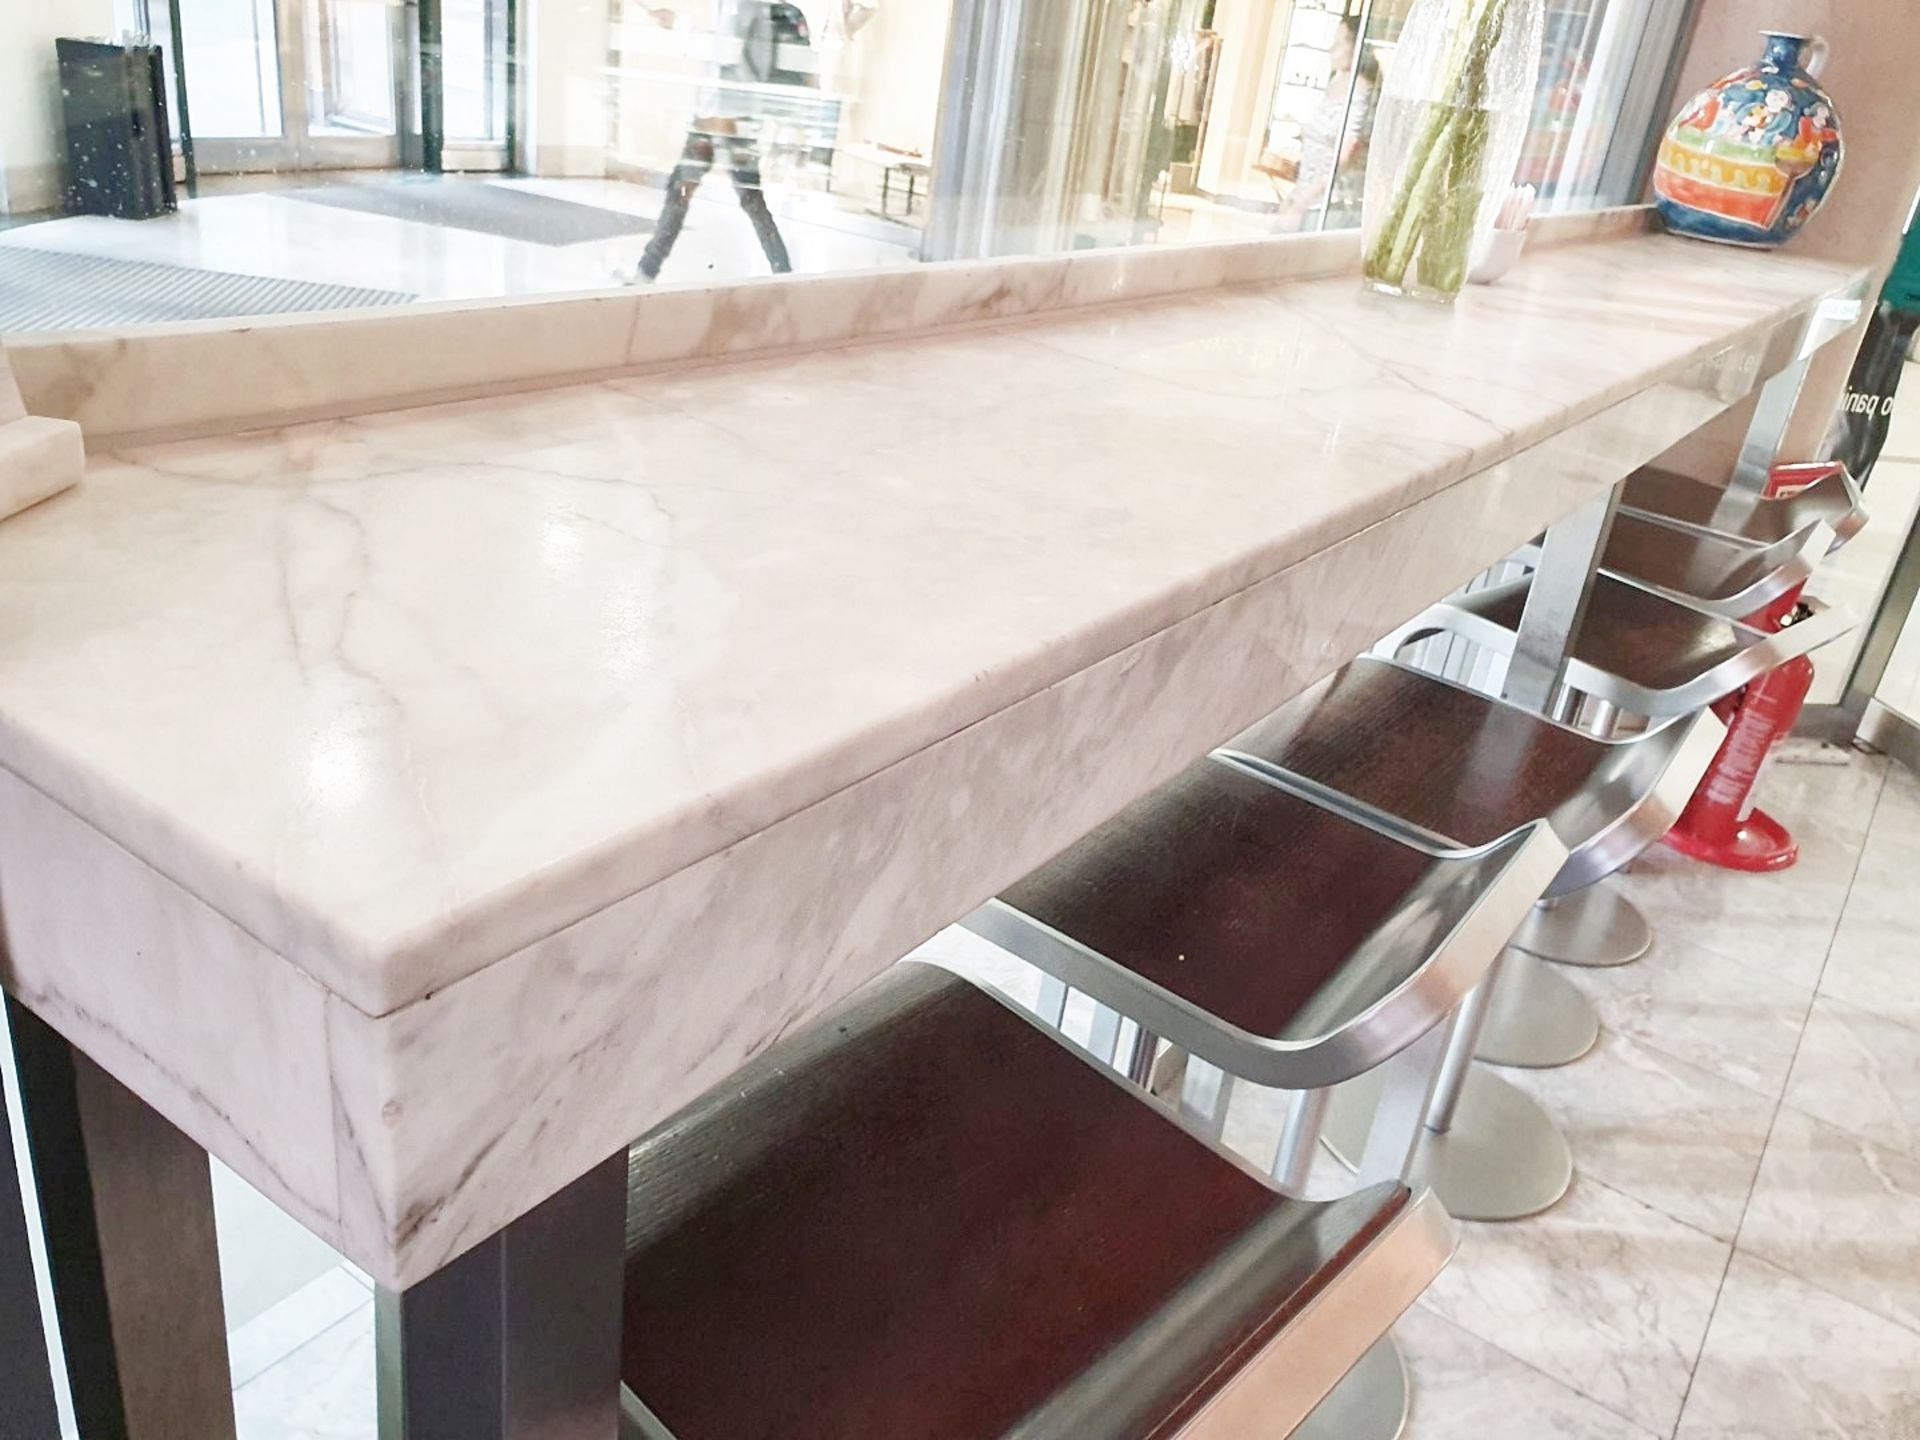 1 x White Marble/Granite Breakfast / Coffee Bar - One Piece - Ref: BRE015 - CL421 - Image 3 of 3